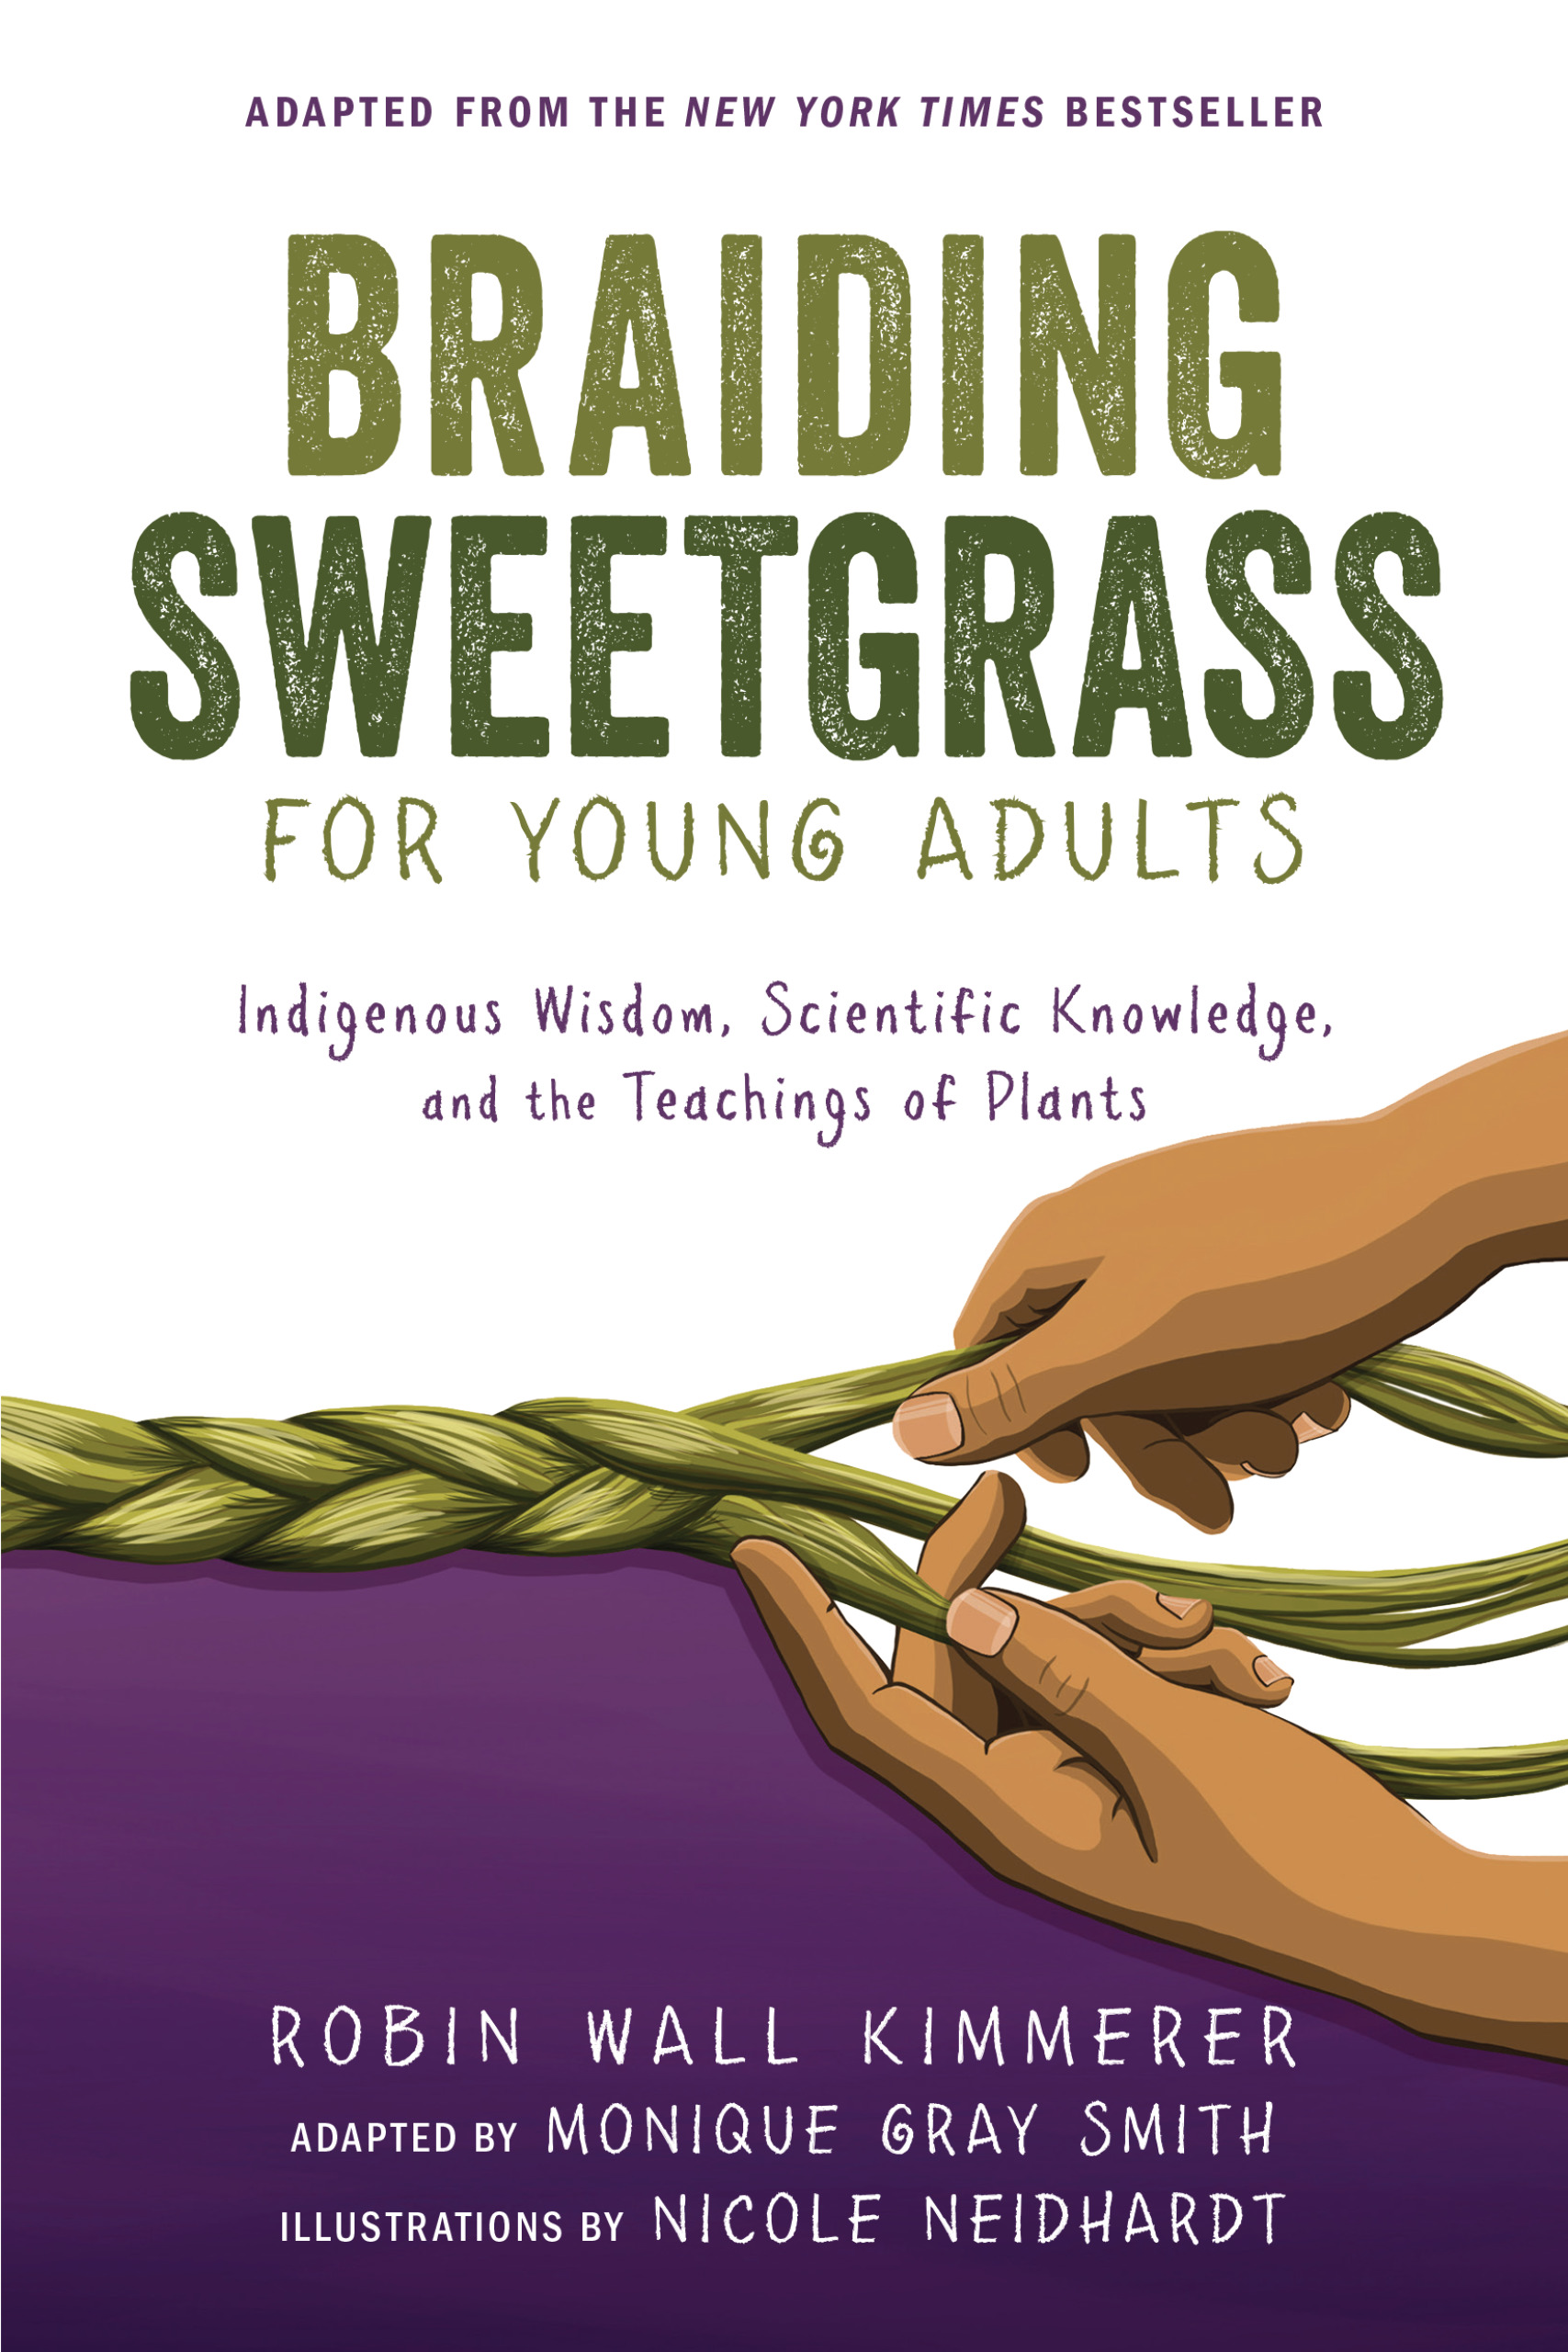 Braiding Sweetgrass for Young Adults - Indigenous Wisdom, Scientific Knowledge, and the Teachings of Plants | 